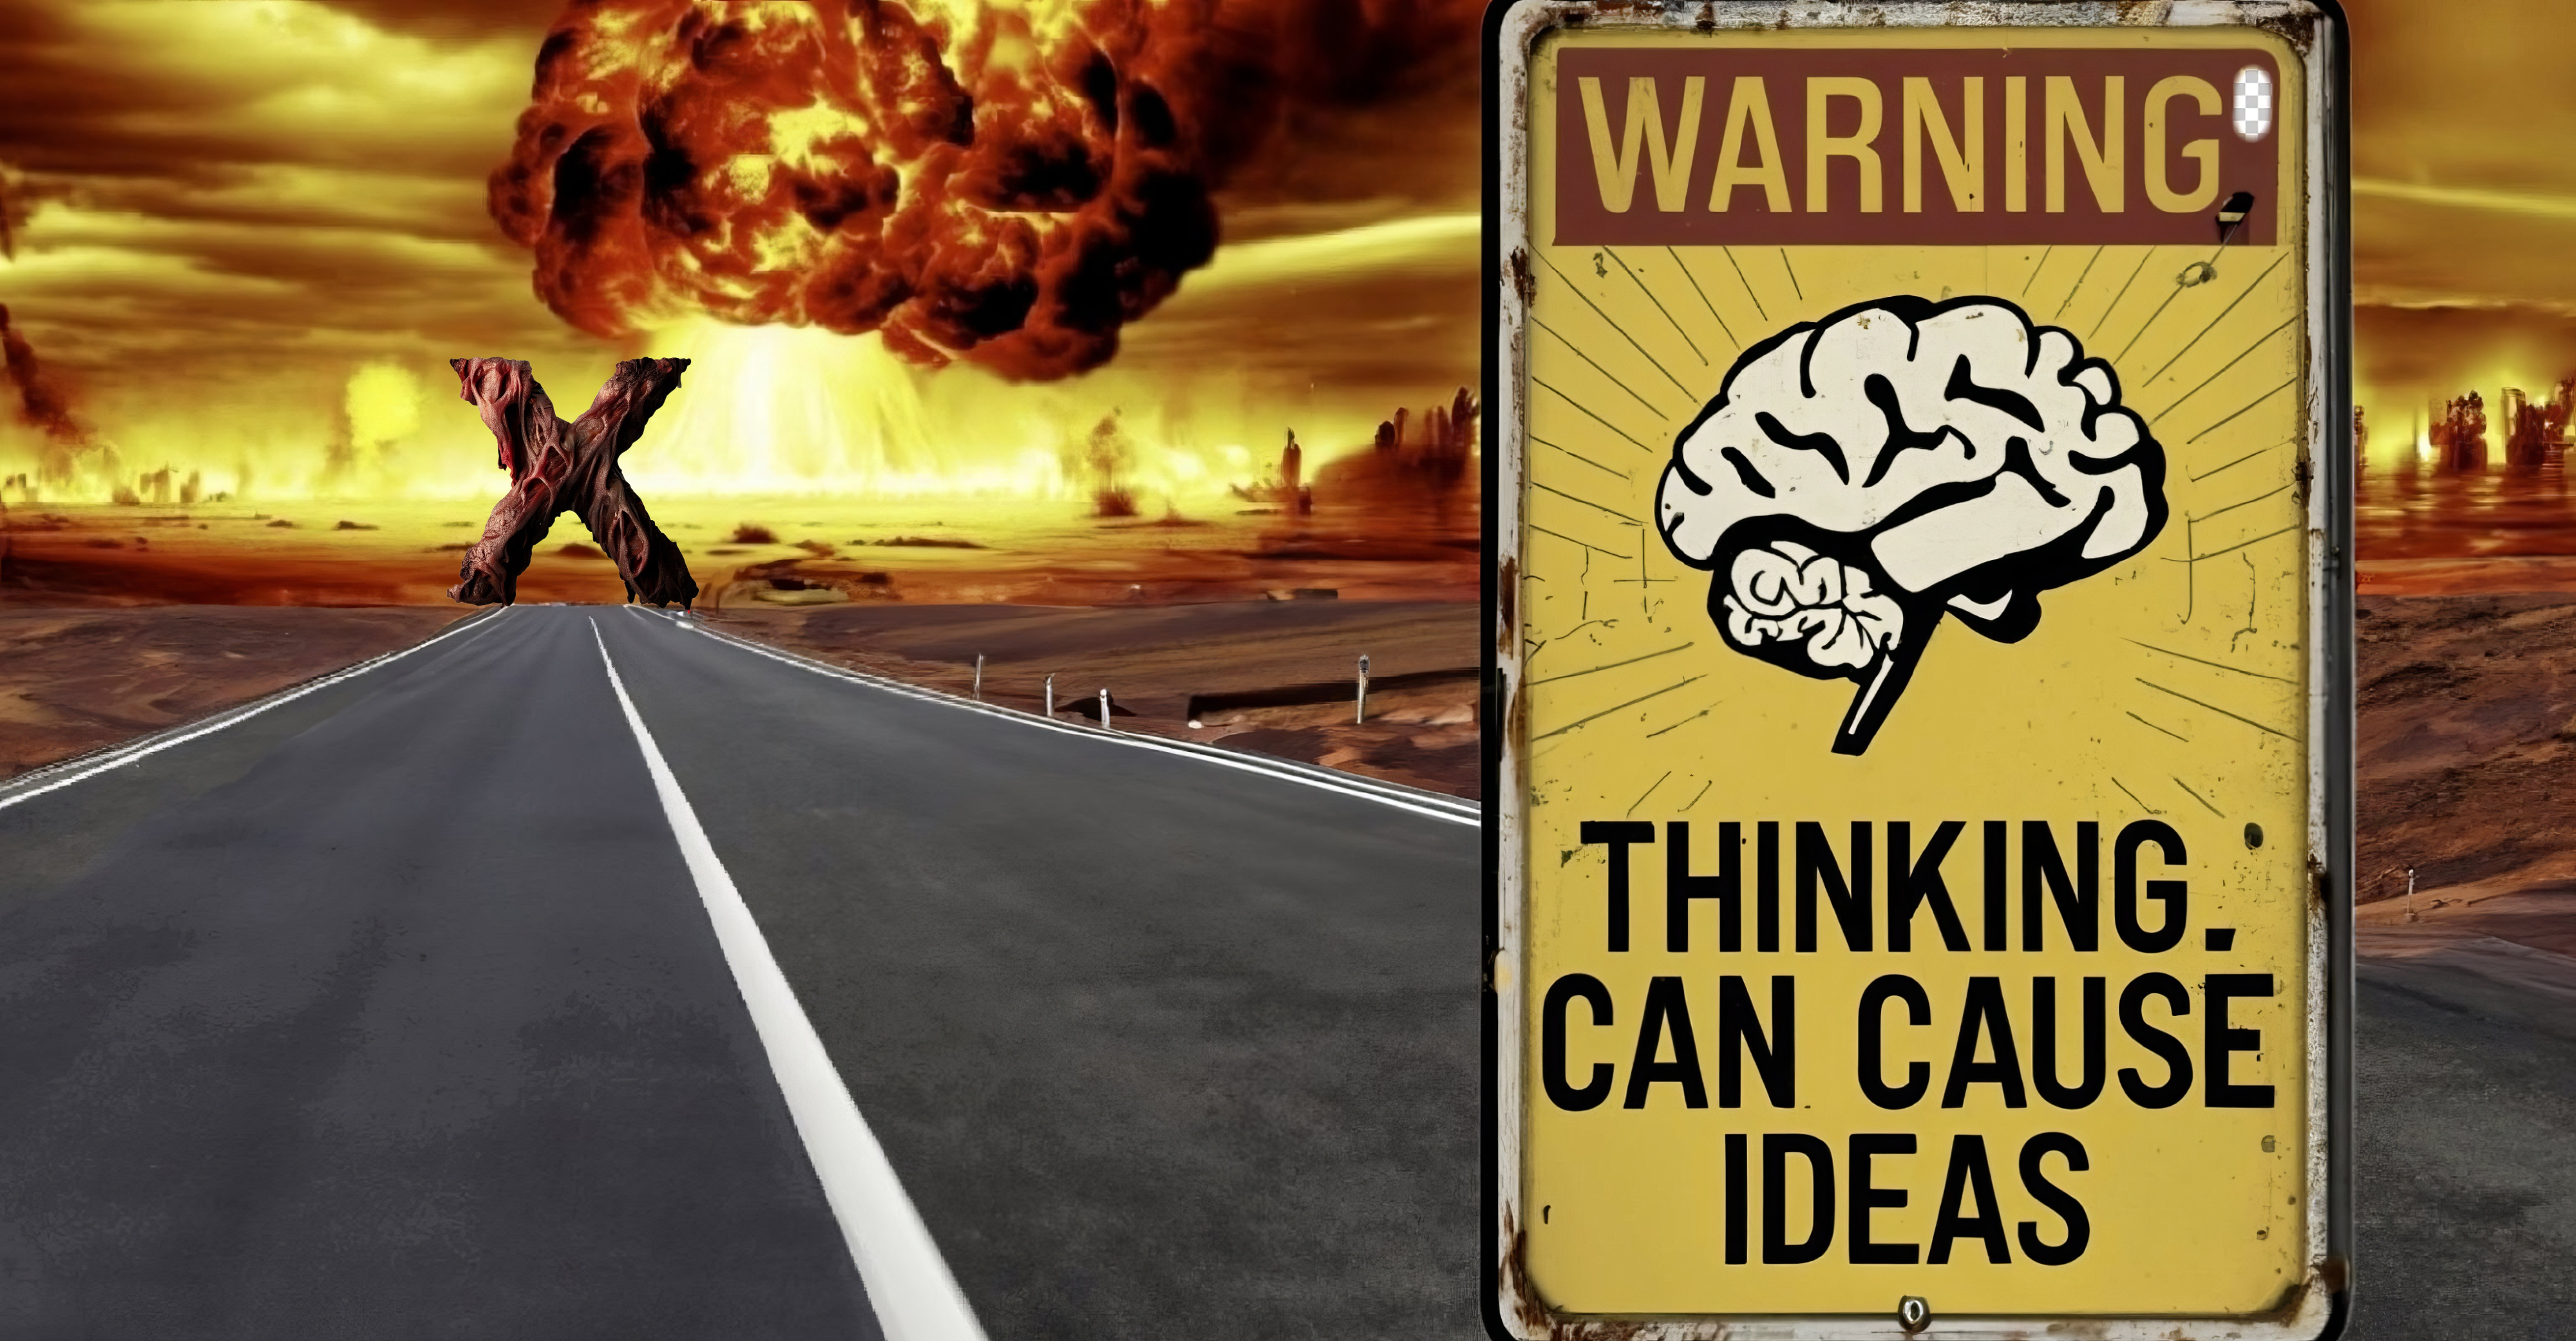 A road heading towards a nuclear apocalypse. A sign reads "Warning: Thinking can Cause Ideas".